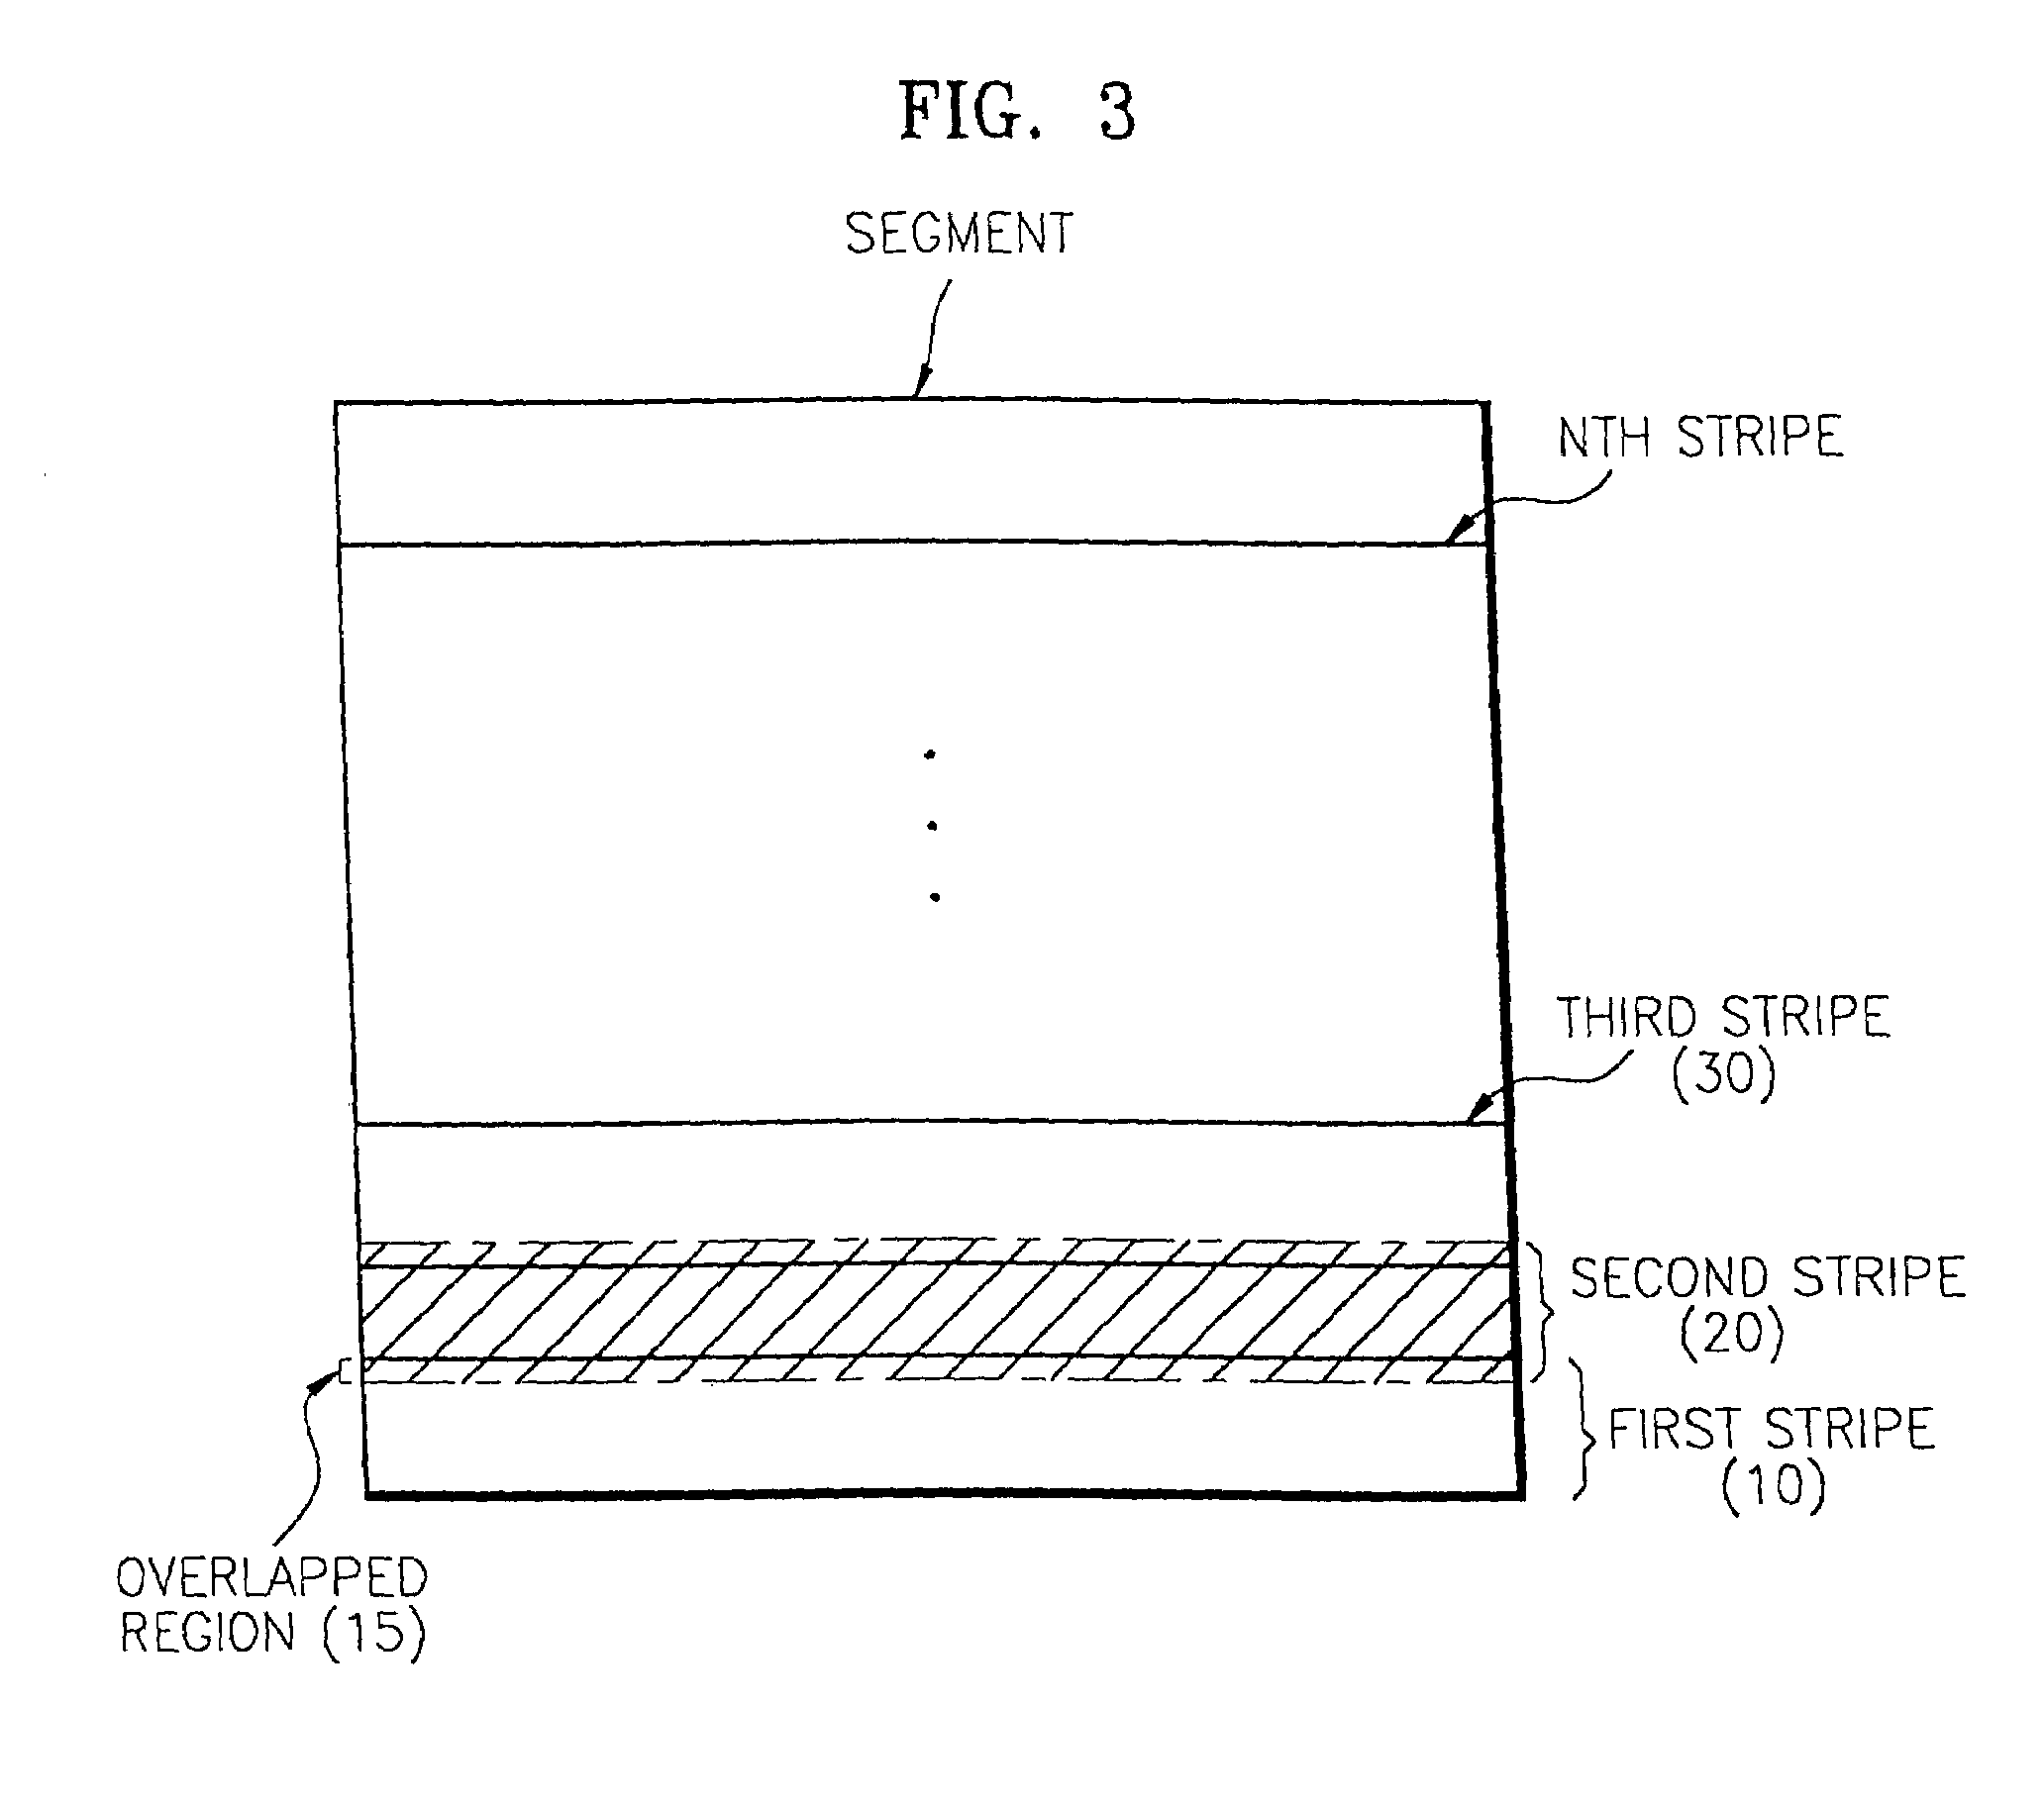 Electron beam lithography method